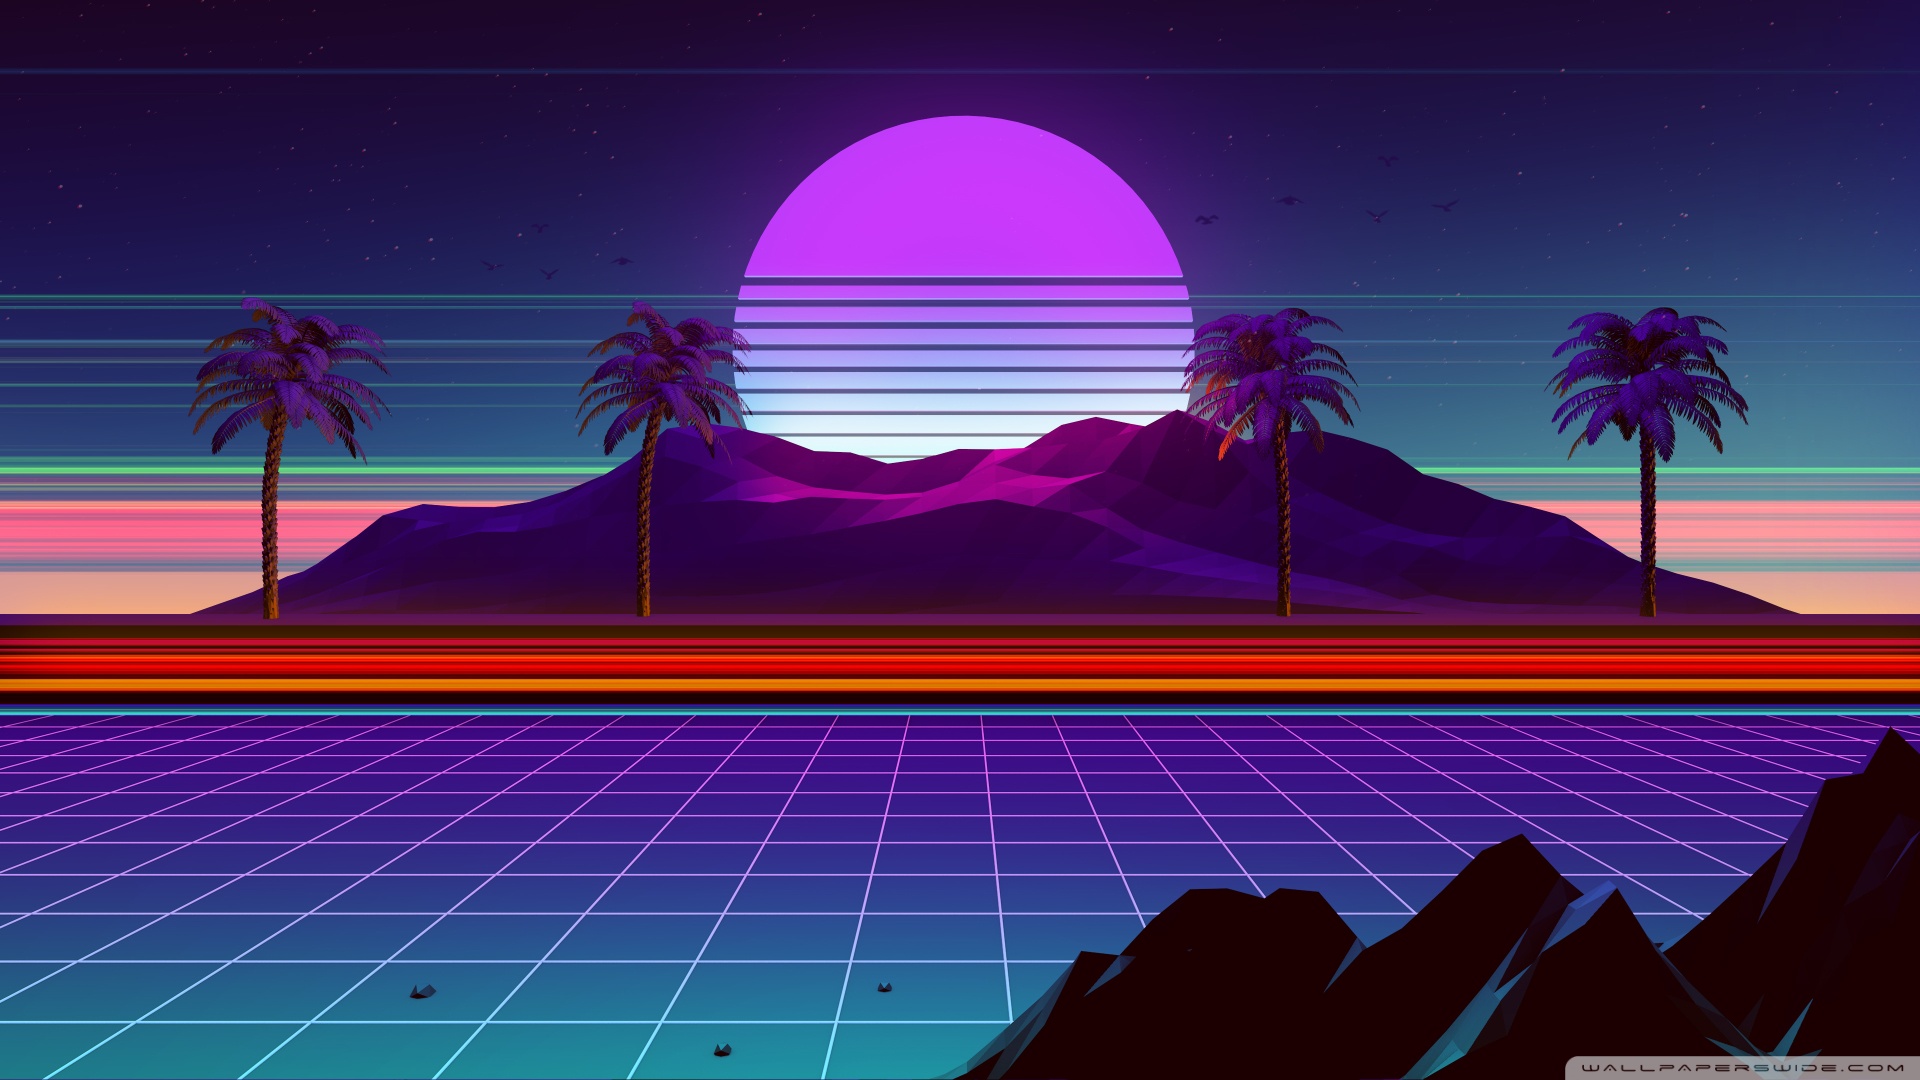 Synth City Wallpapers